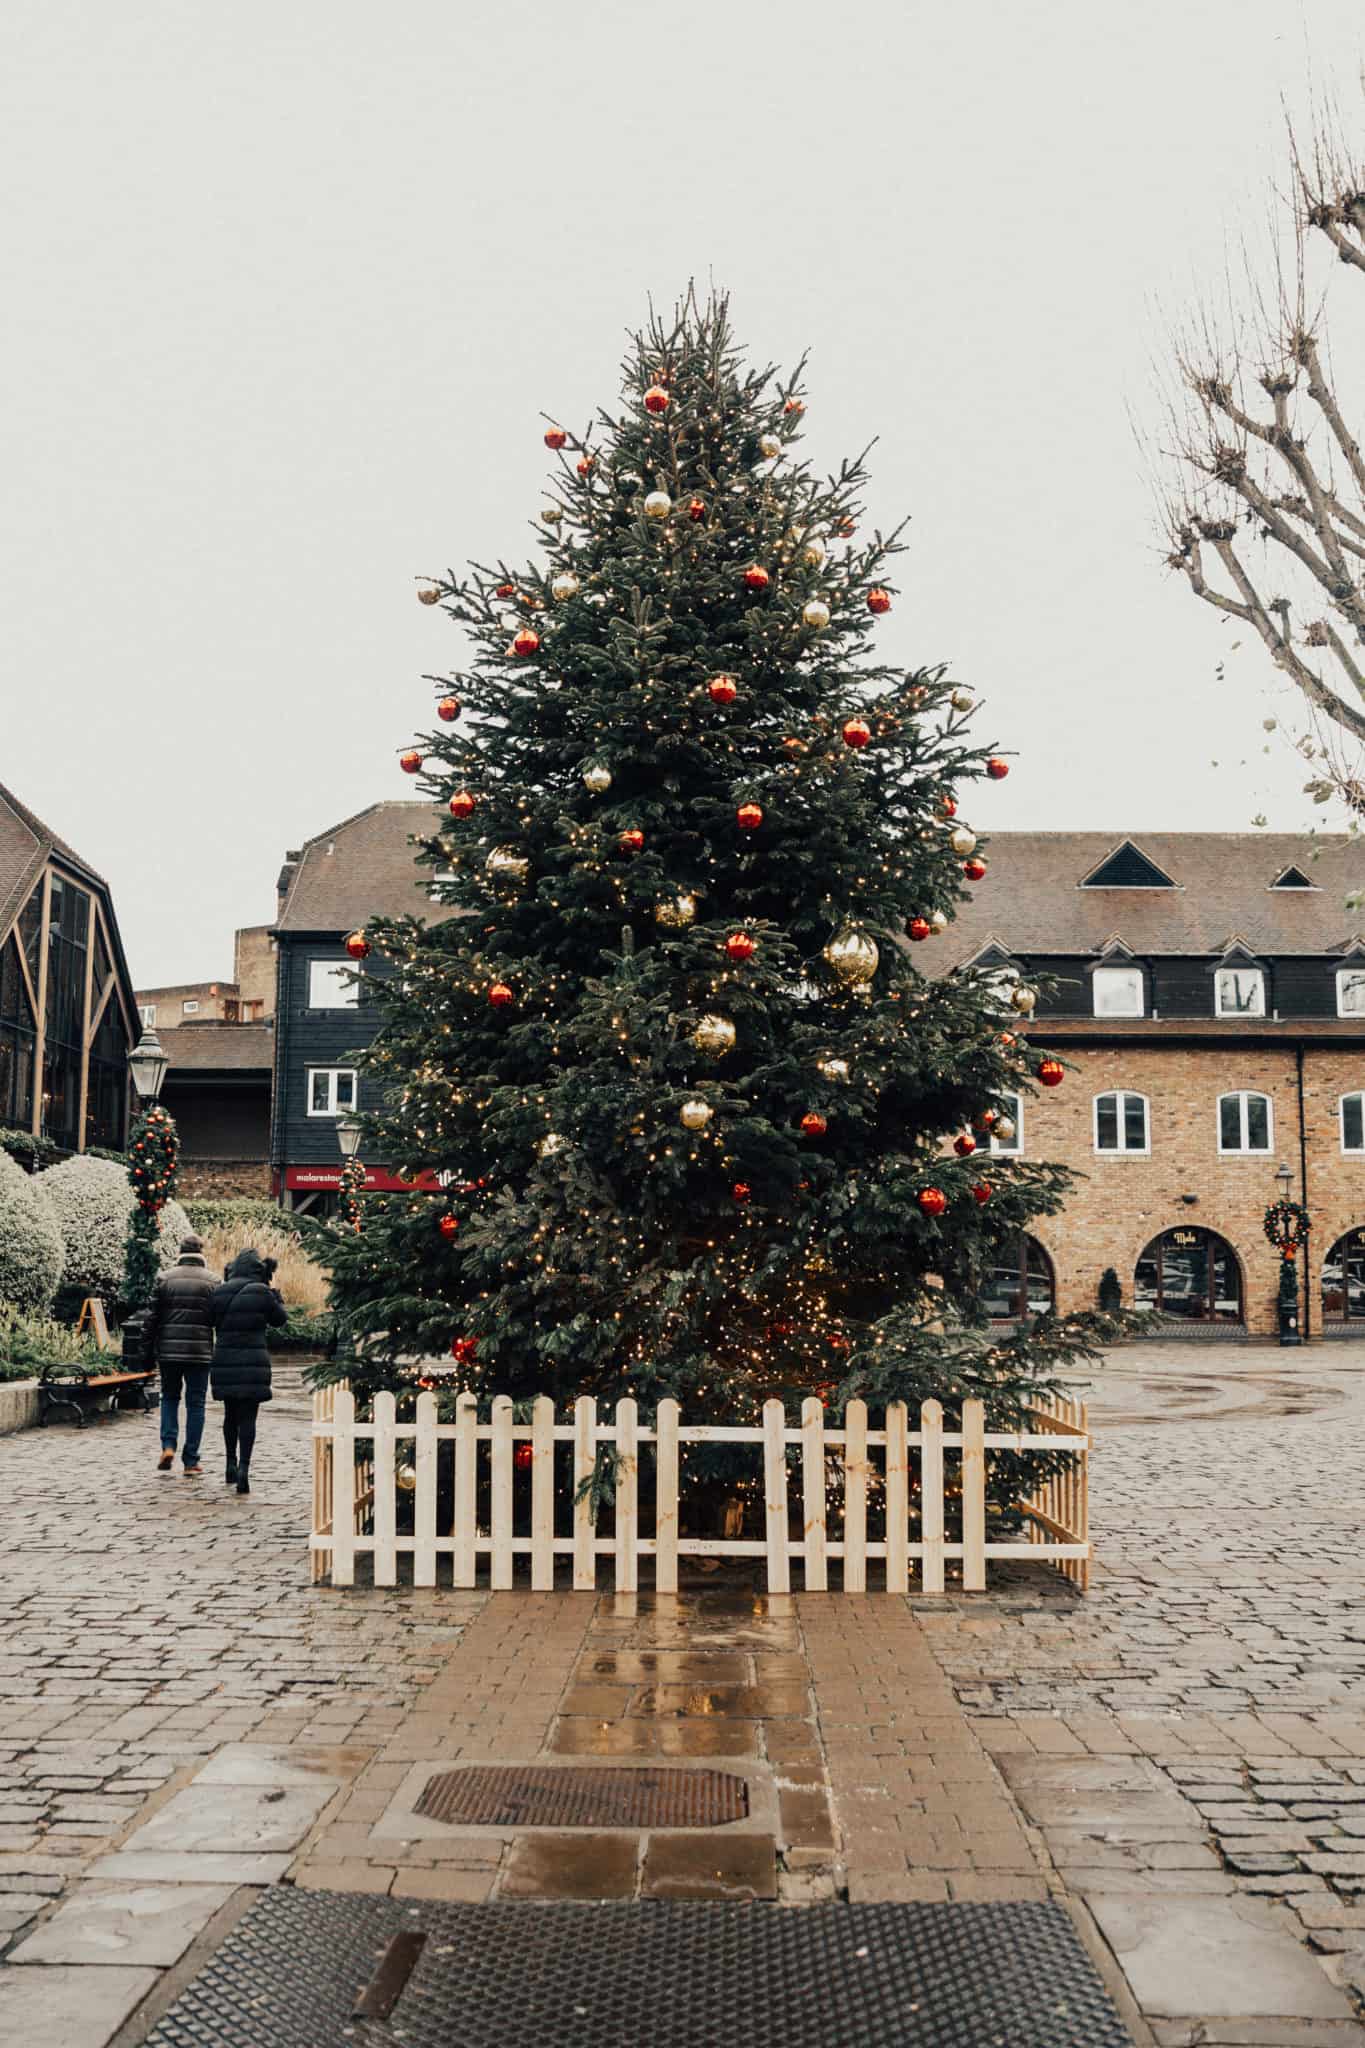 If you're looking for the best things to do in London during winter, this post is for you! We're sharing why this time of year is the ideal time to visit London - hardly any tourists, cheaper prices, and of course, Christmas cheer!